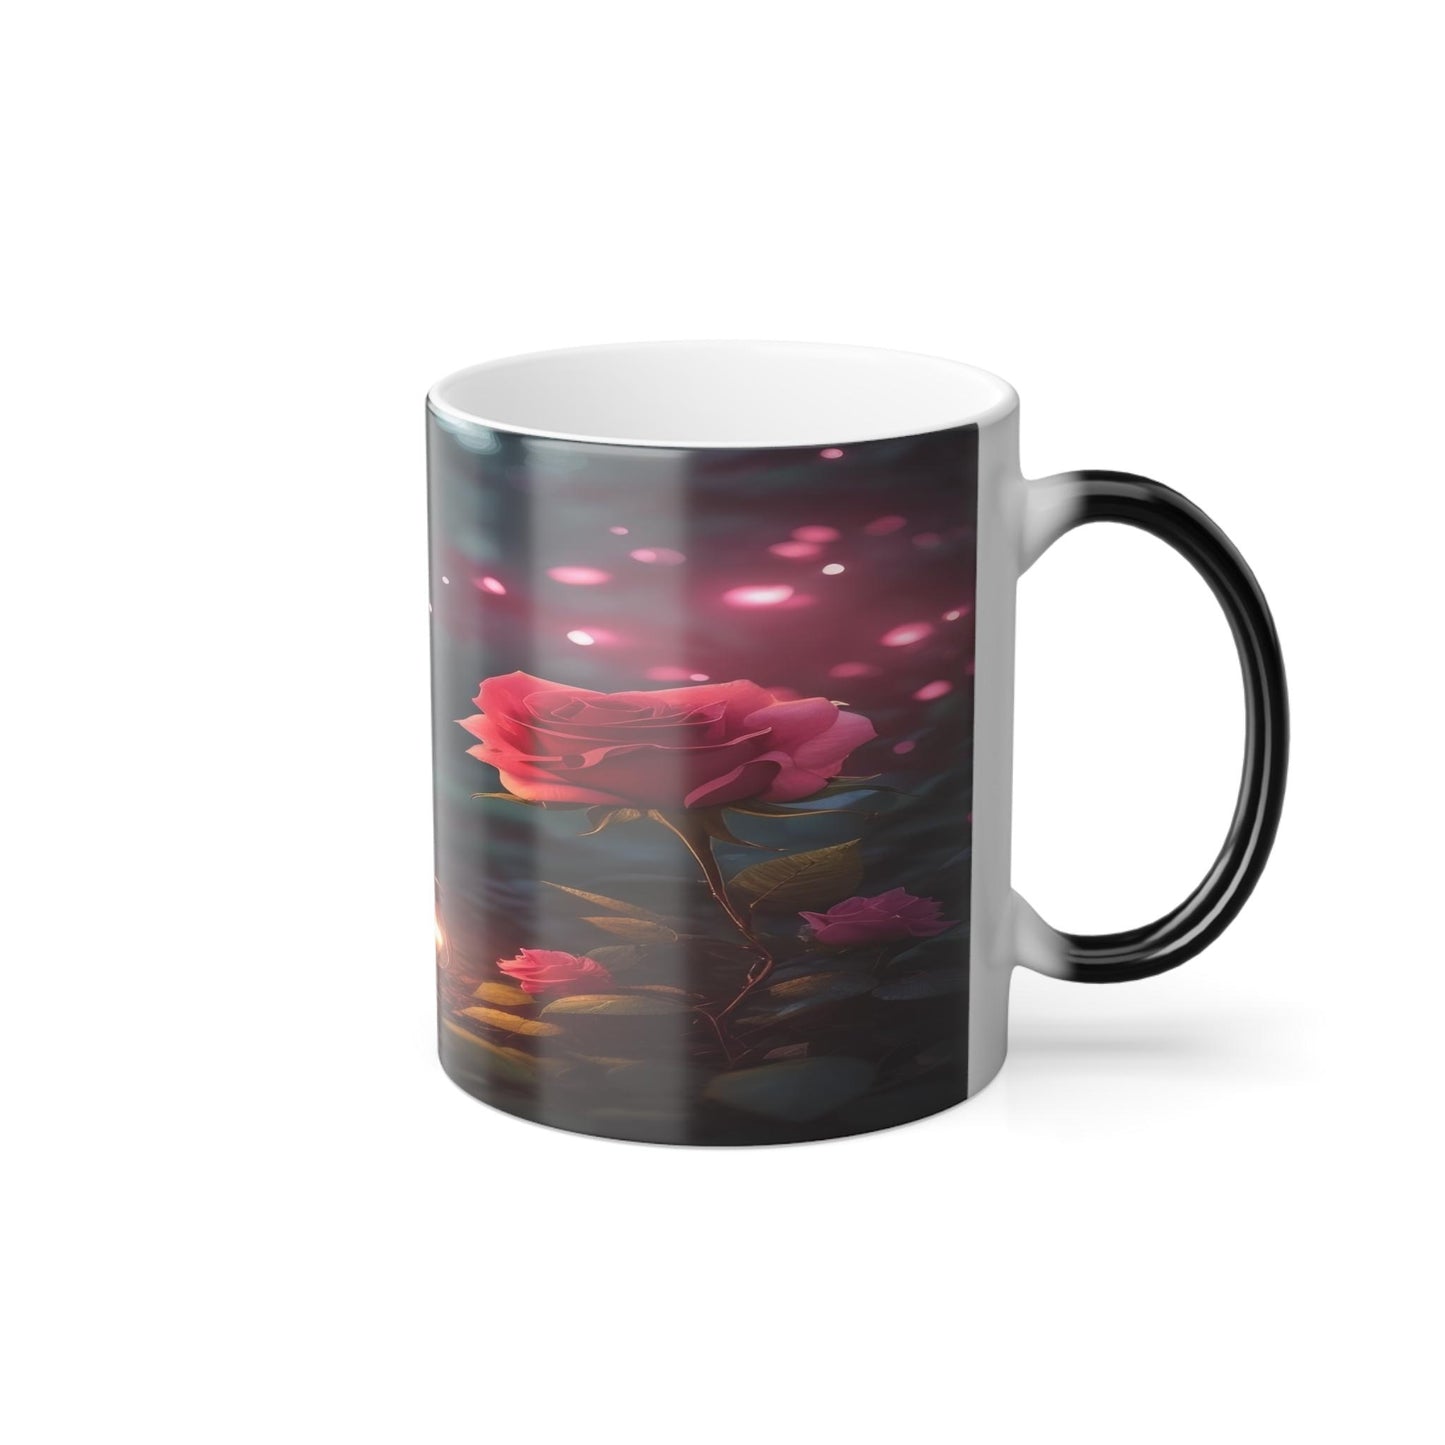 Enchanting Flower Magic Morphing Mug 11oz - Lovely Heat Sensitive Coffee Tea Cup with Flower, Rose, Tree, Heart Designs - Special Gifts for Flower Lovers 13